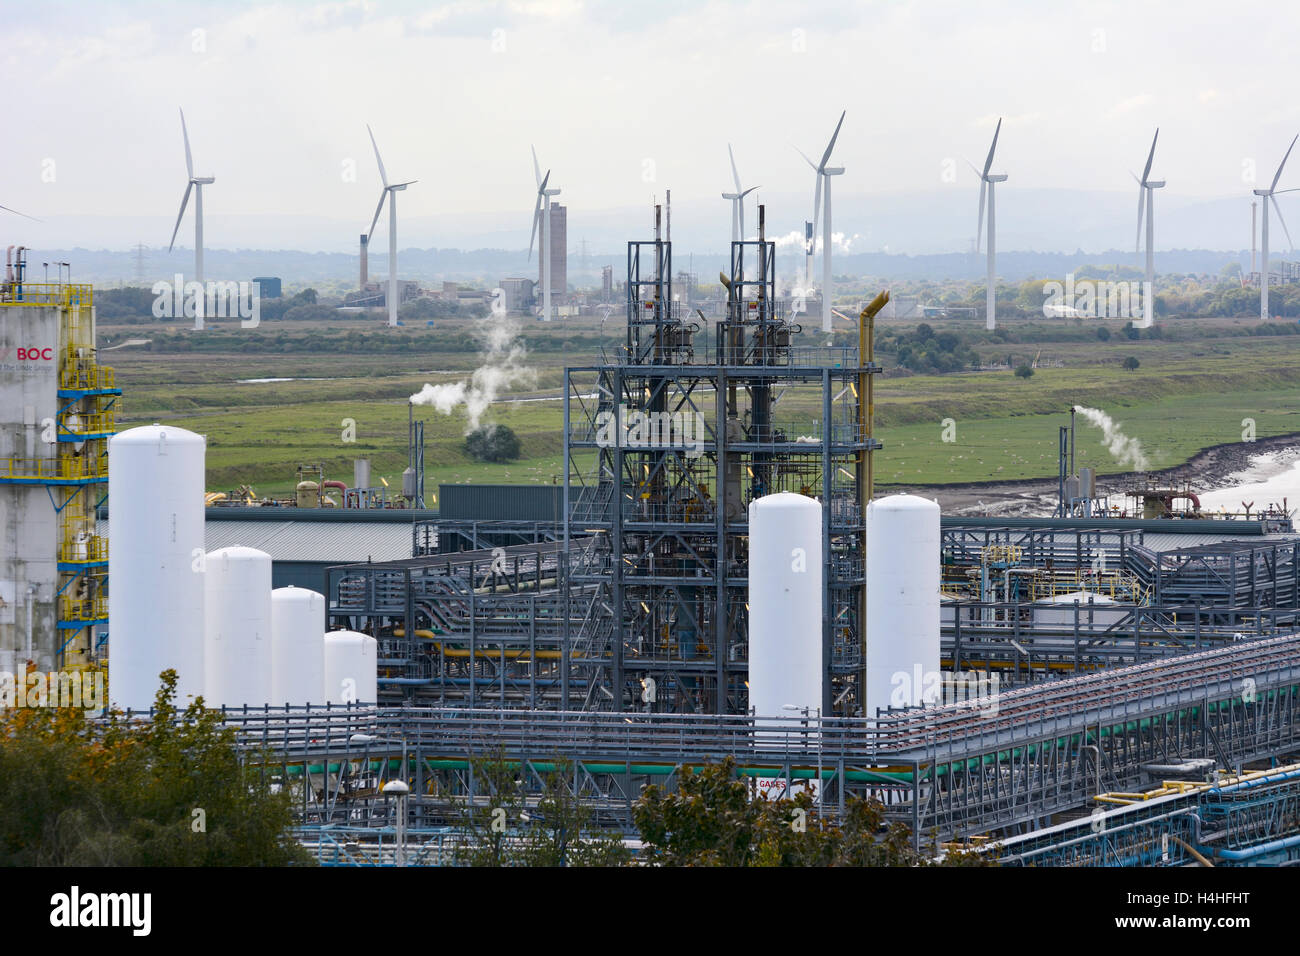 Ineos chemical plant at Weston Point, Runcorn, with the Frodsham wind farm on Frodsham Marshes in the background. Stock Photo